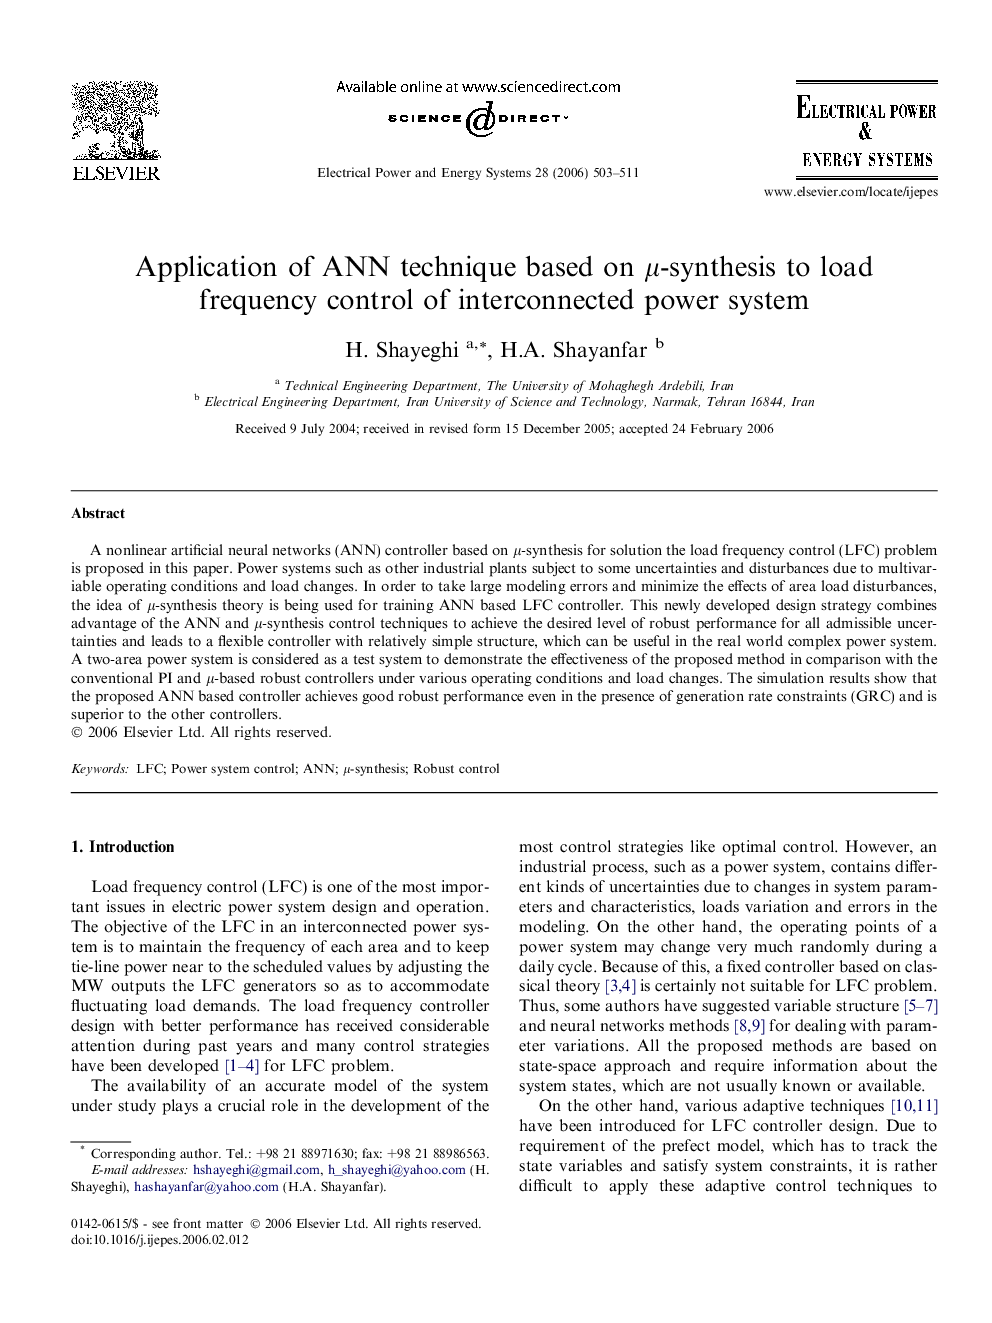 Application of ANN technique based on μ-synthesis to load frequency control of interconnected power system